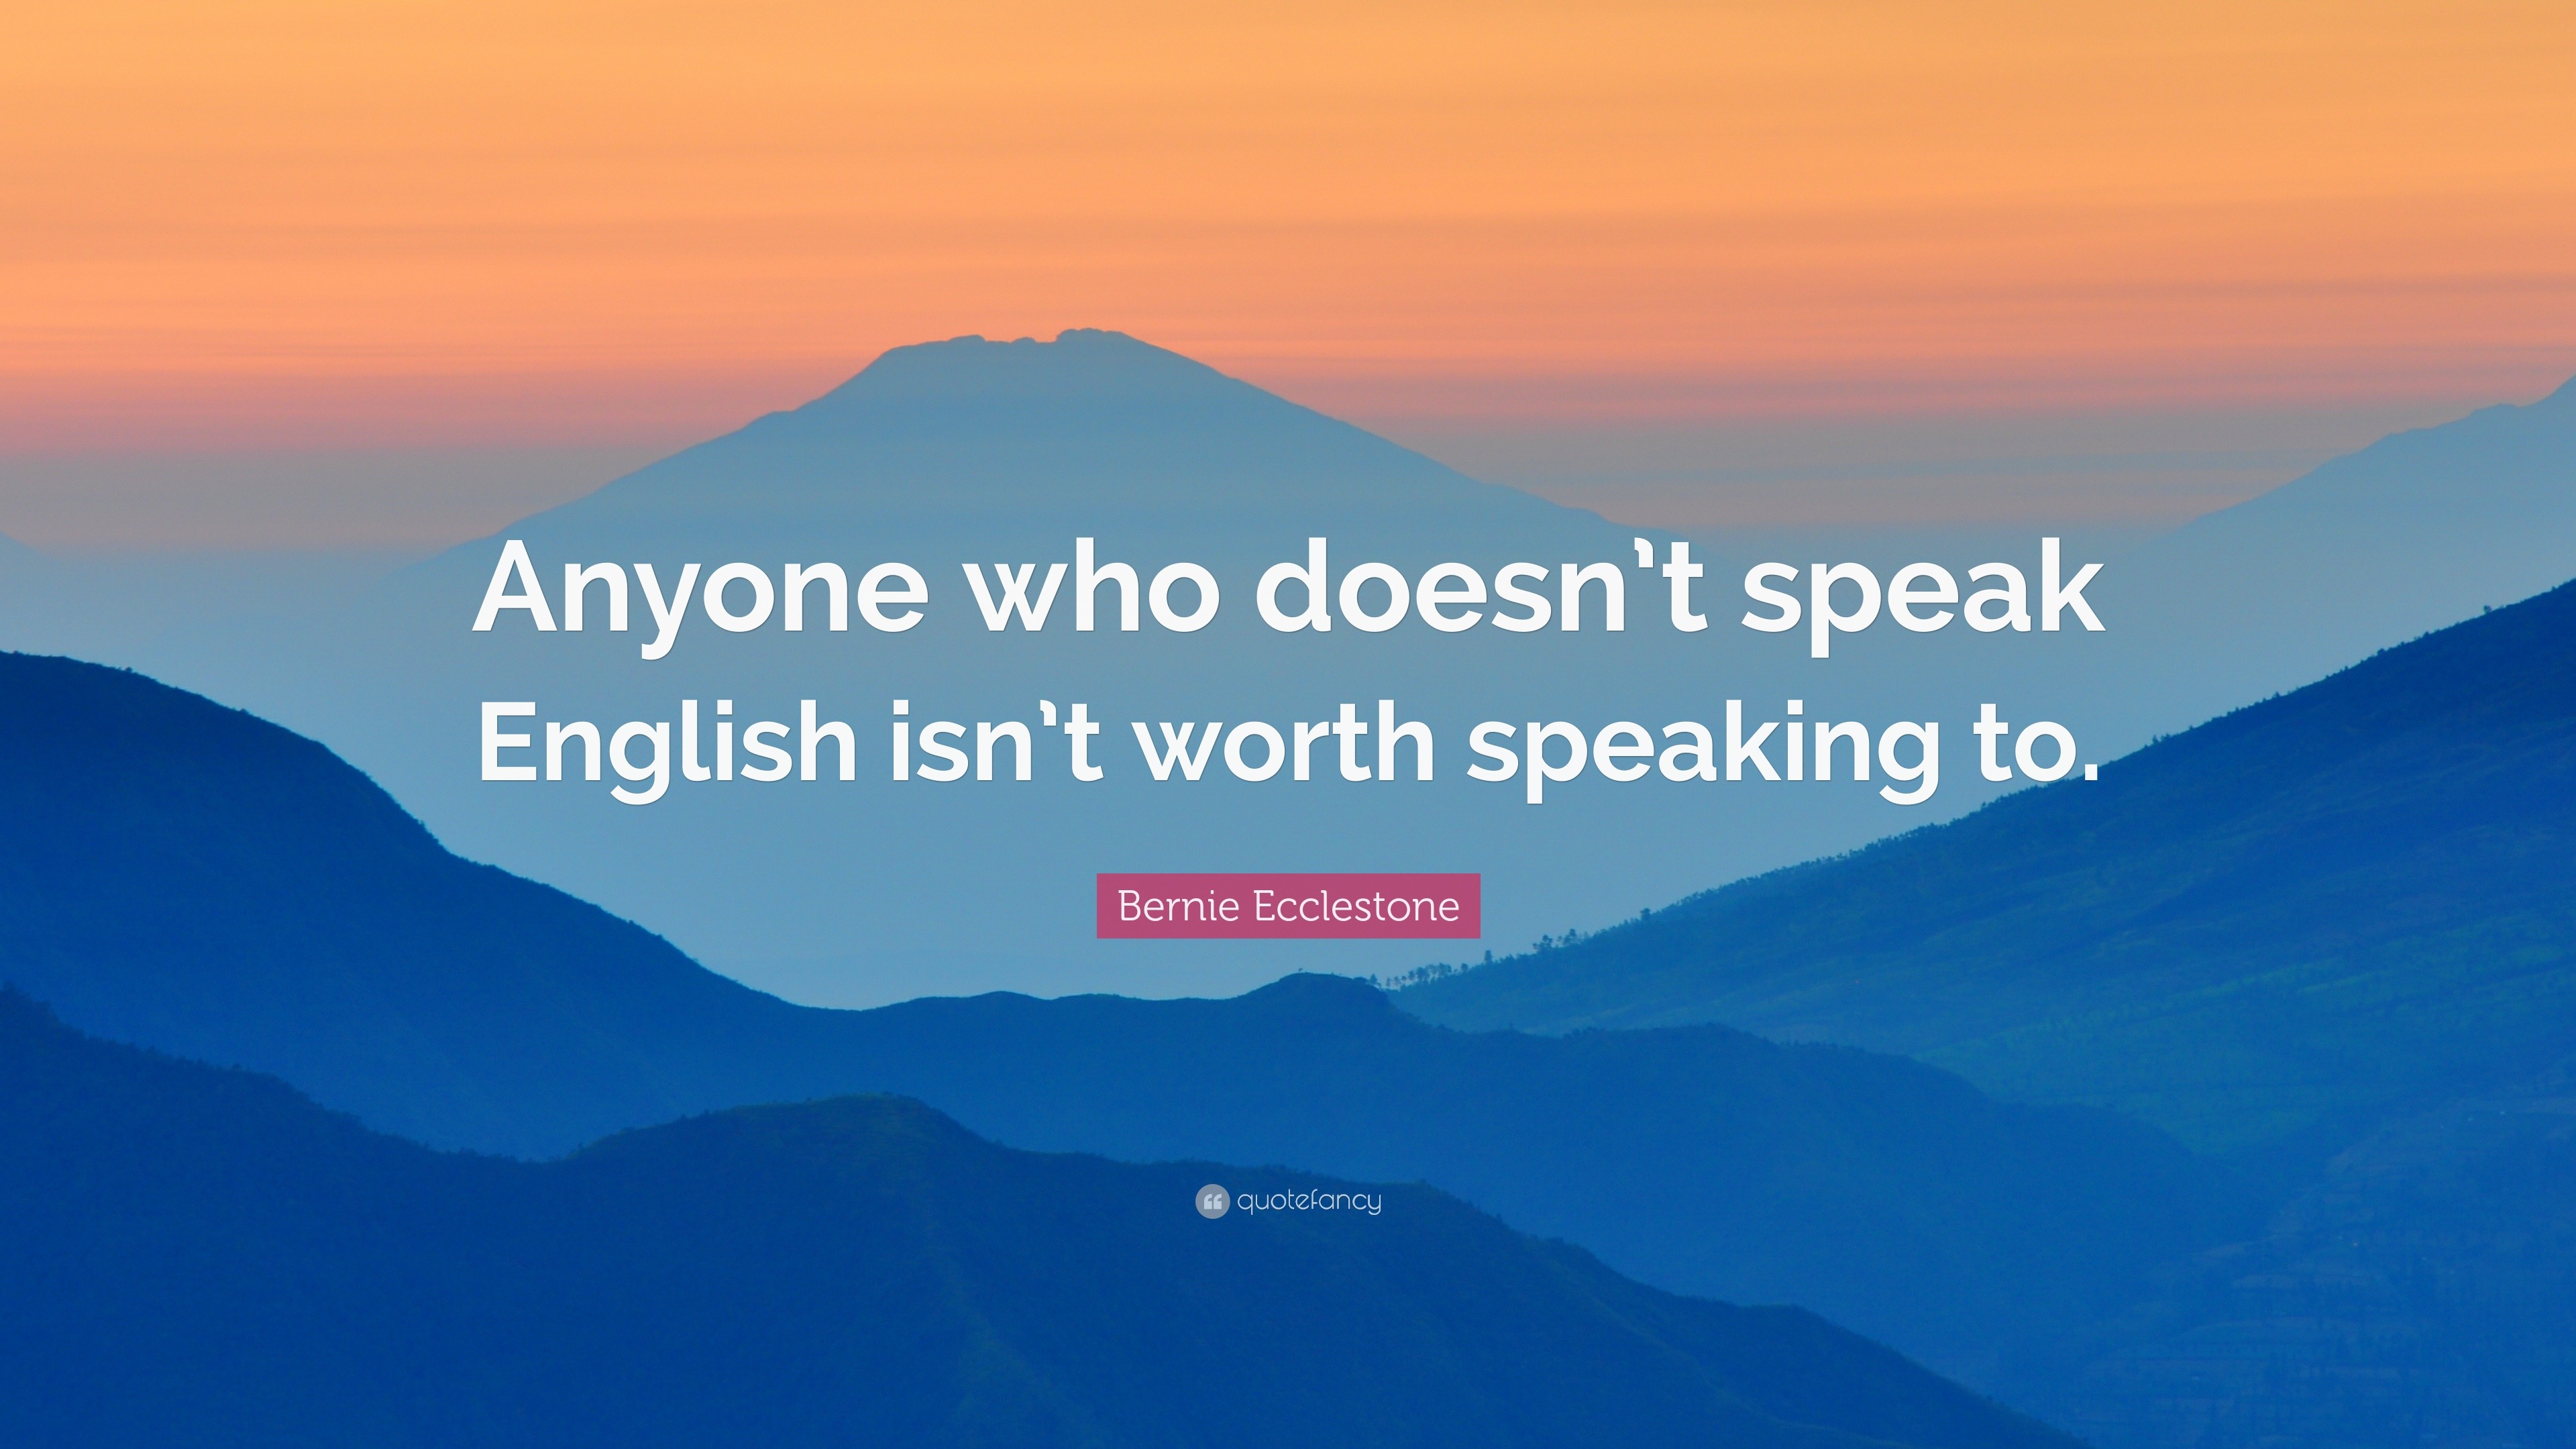 Bernie Ecclestone Quote Anyone Who Doesn T Speak English Isn T Worth Speaking To 9 Wallpapers Quotefancy